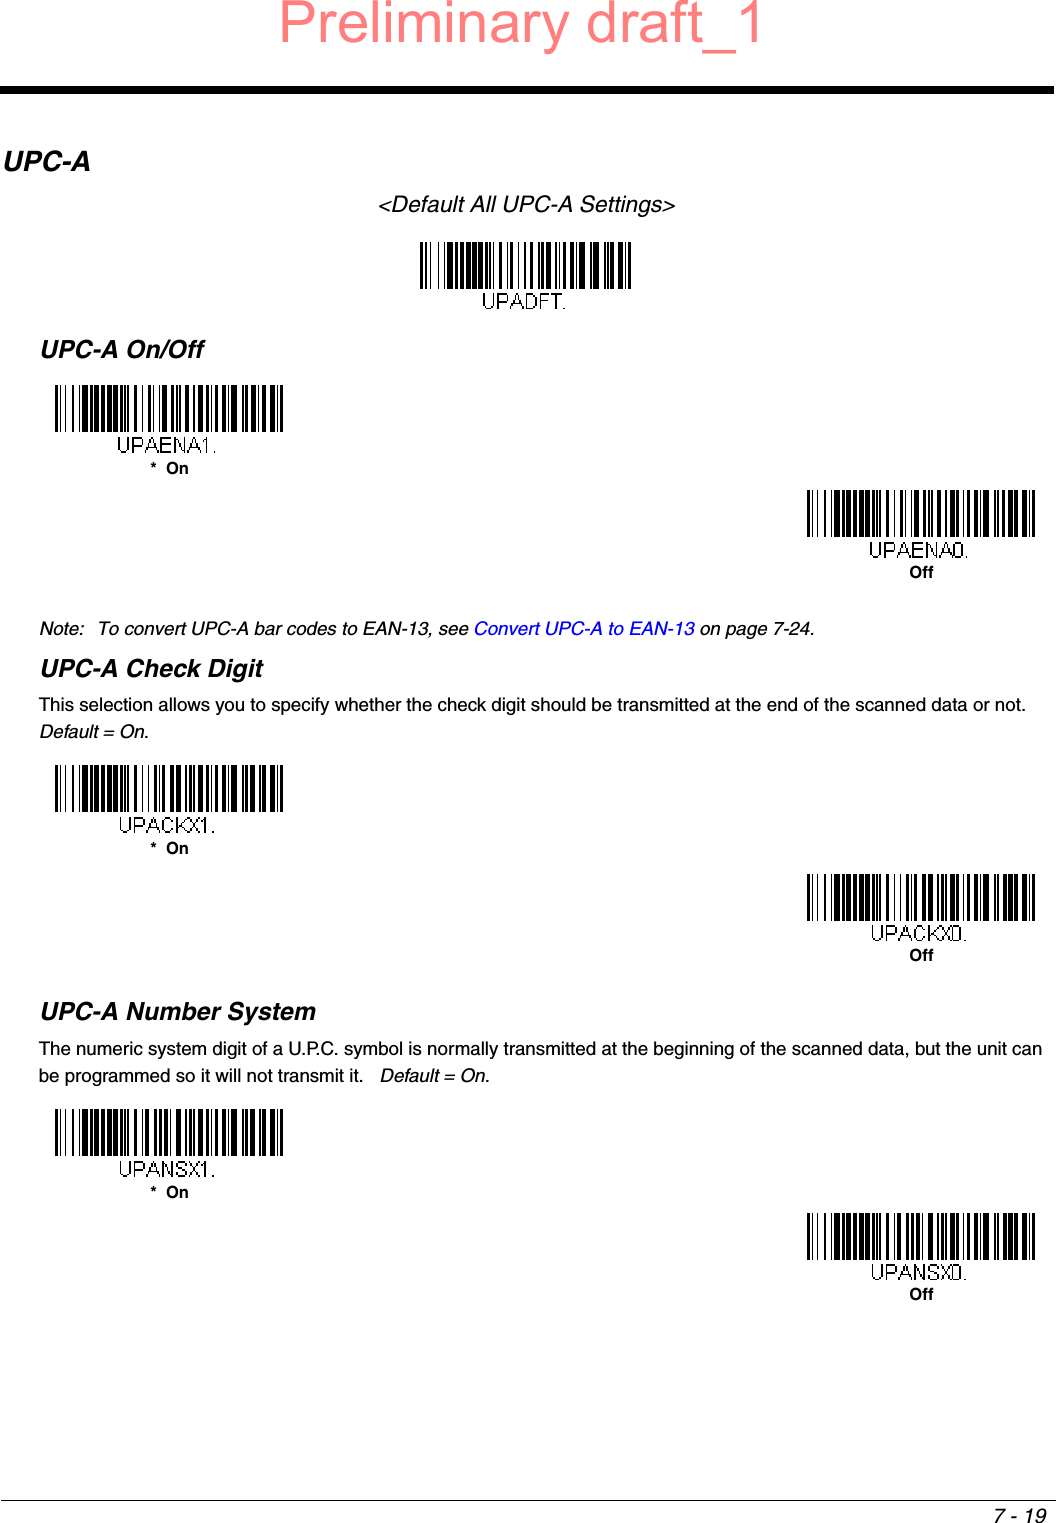 7 - 19UPC-A&lt;Default All UPC-A Settings&gt;UPC-A On/OffNote: To convert UPC-A bar codes to EAN-13, see Convert UPC-A to EAN-13 on page 7-24.UPC-A Check DigitThis selection allows you to specify whether the check digit should be transmitted at the end of the scanned data or not.  Default = On.UPC-A Number SystemThe numeric system digit of a U.P.C. symbol is normally transmitted at the beginning of the scanned data, but the unit can be programmed so it will not transmit it.   Default = On.*  OnOff*  OnOff*  OnOffPreliminary draft_1